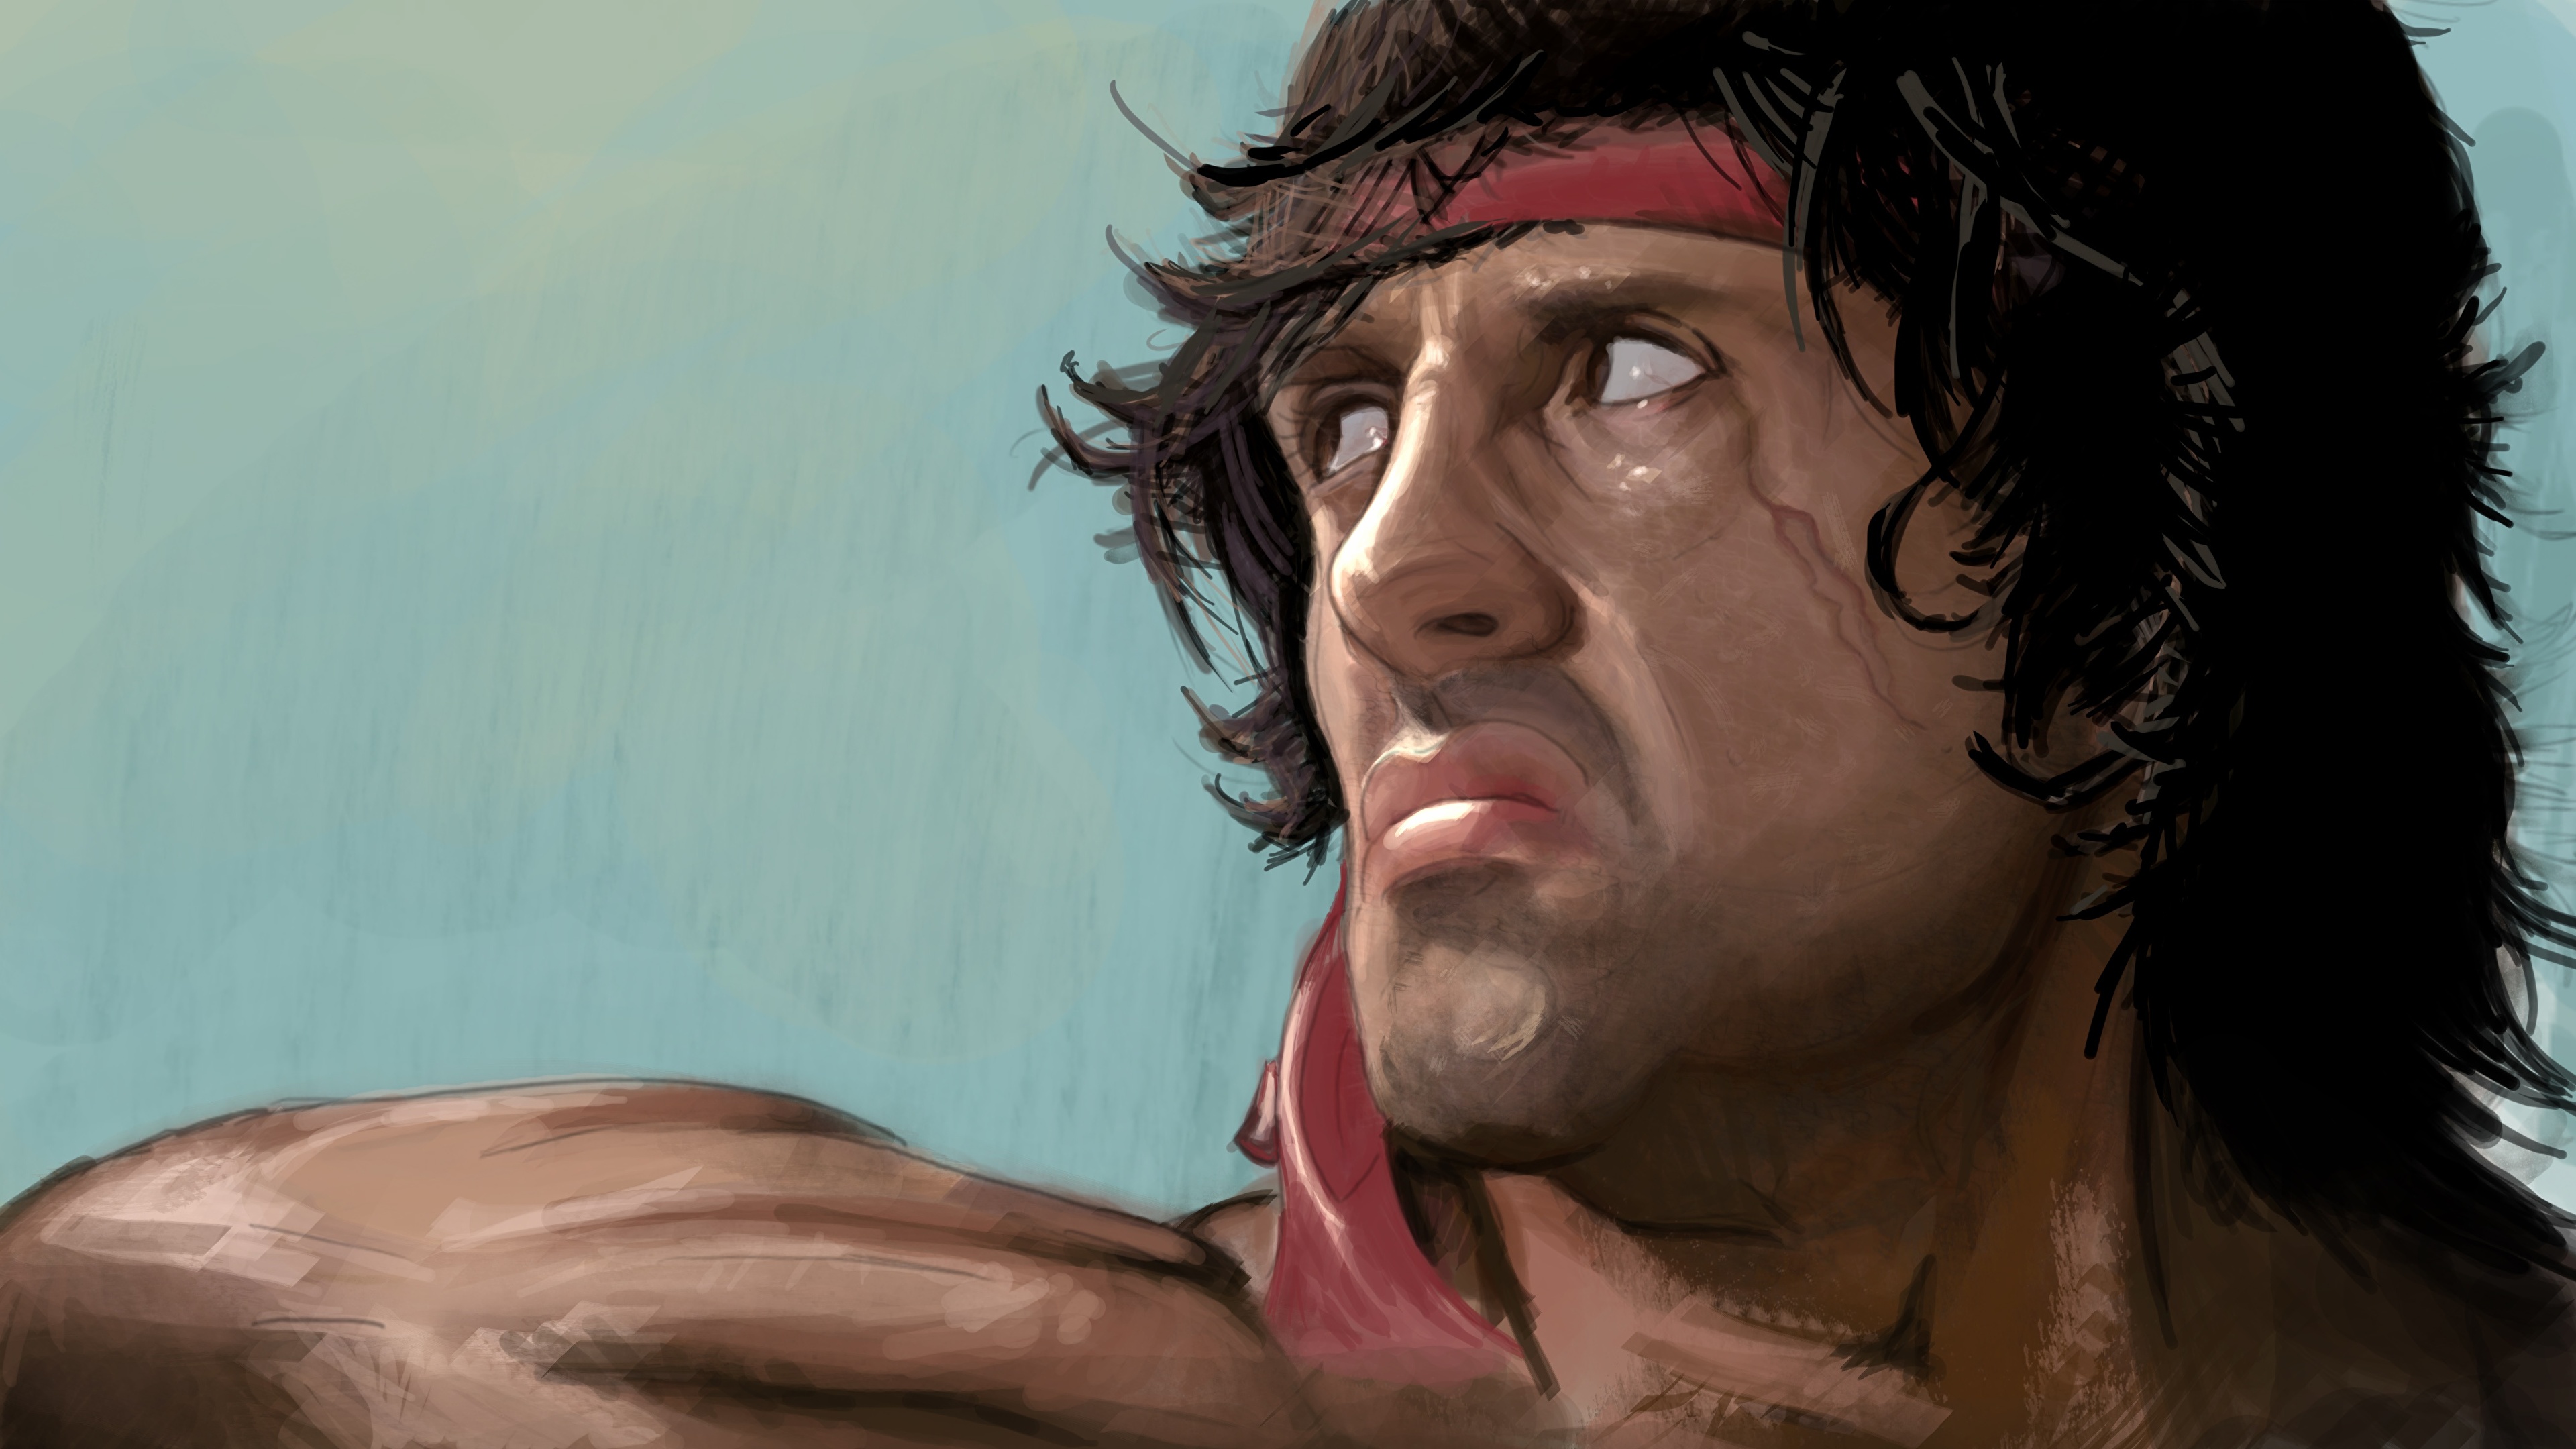 image Sylvester Stallone dissatisfied Rambo Face Movies 3840x2160